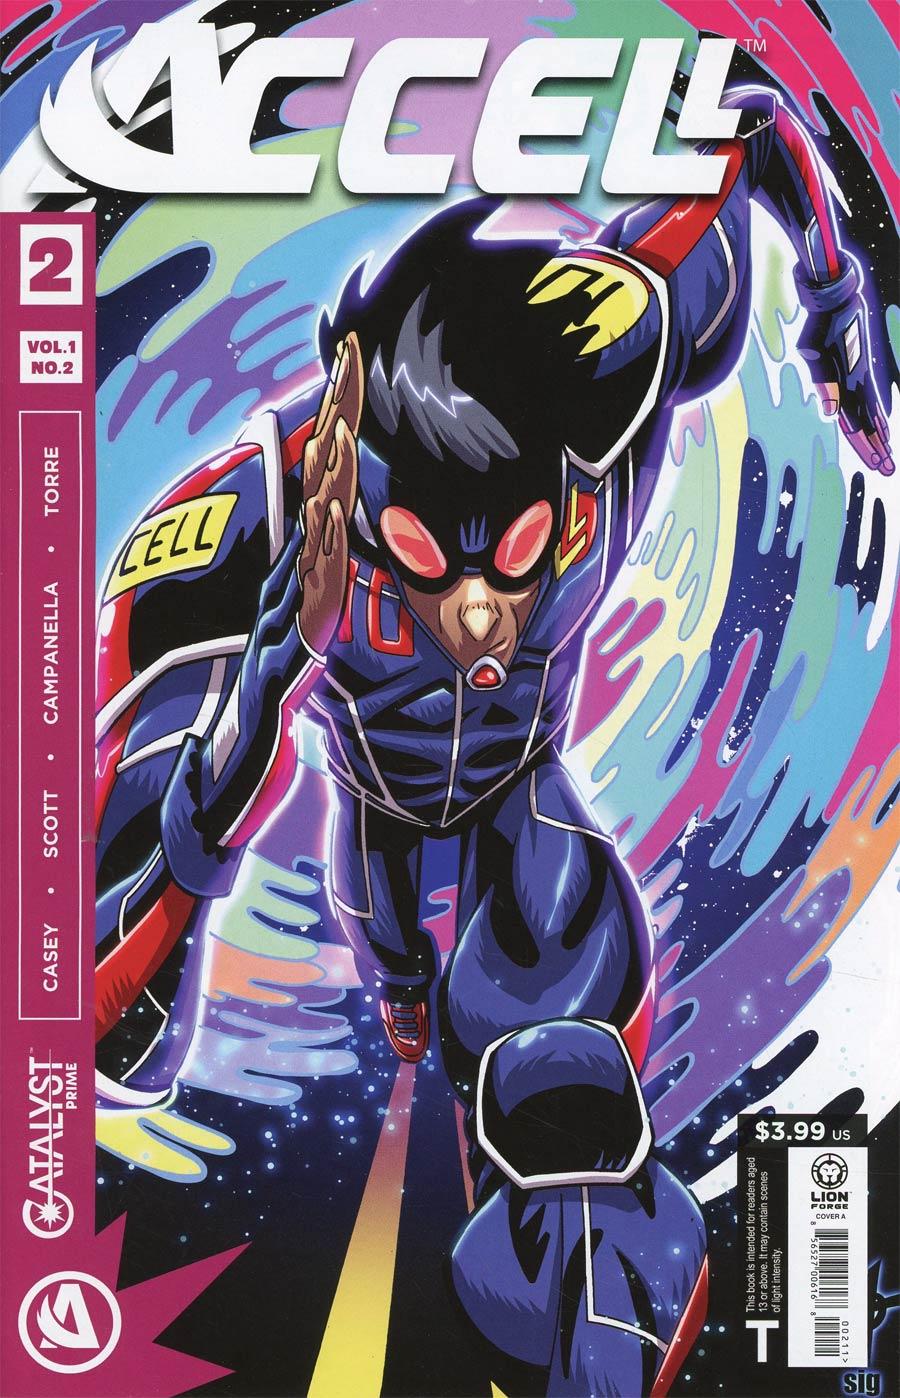 Catalyst Prime Accell Vol. 1 #2